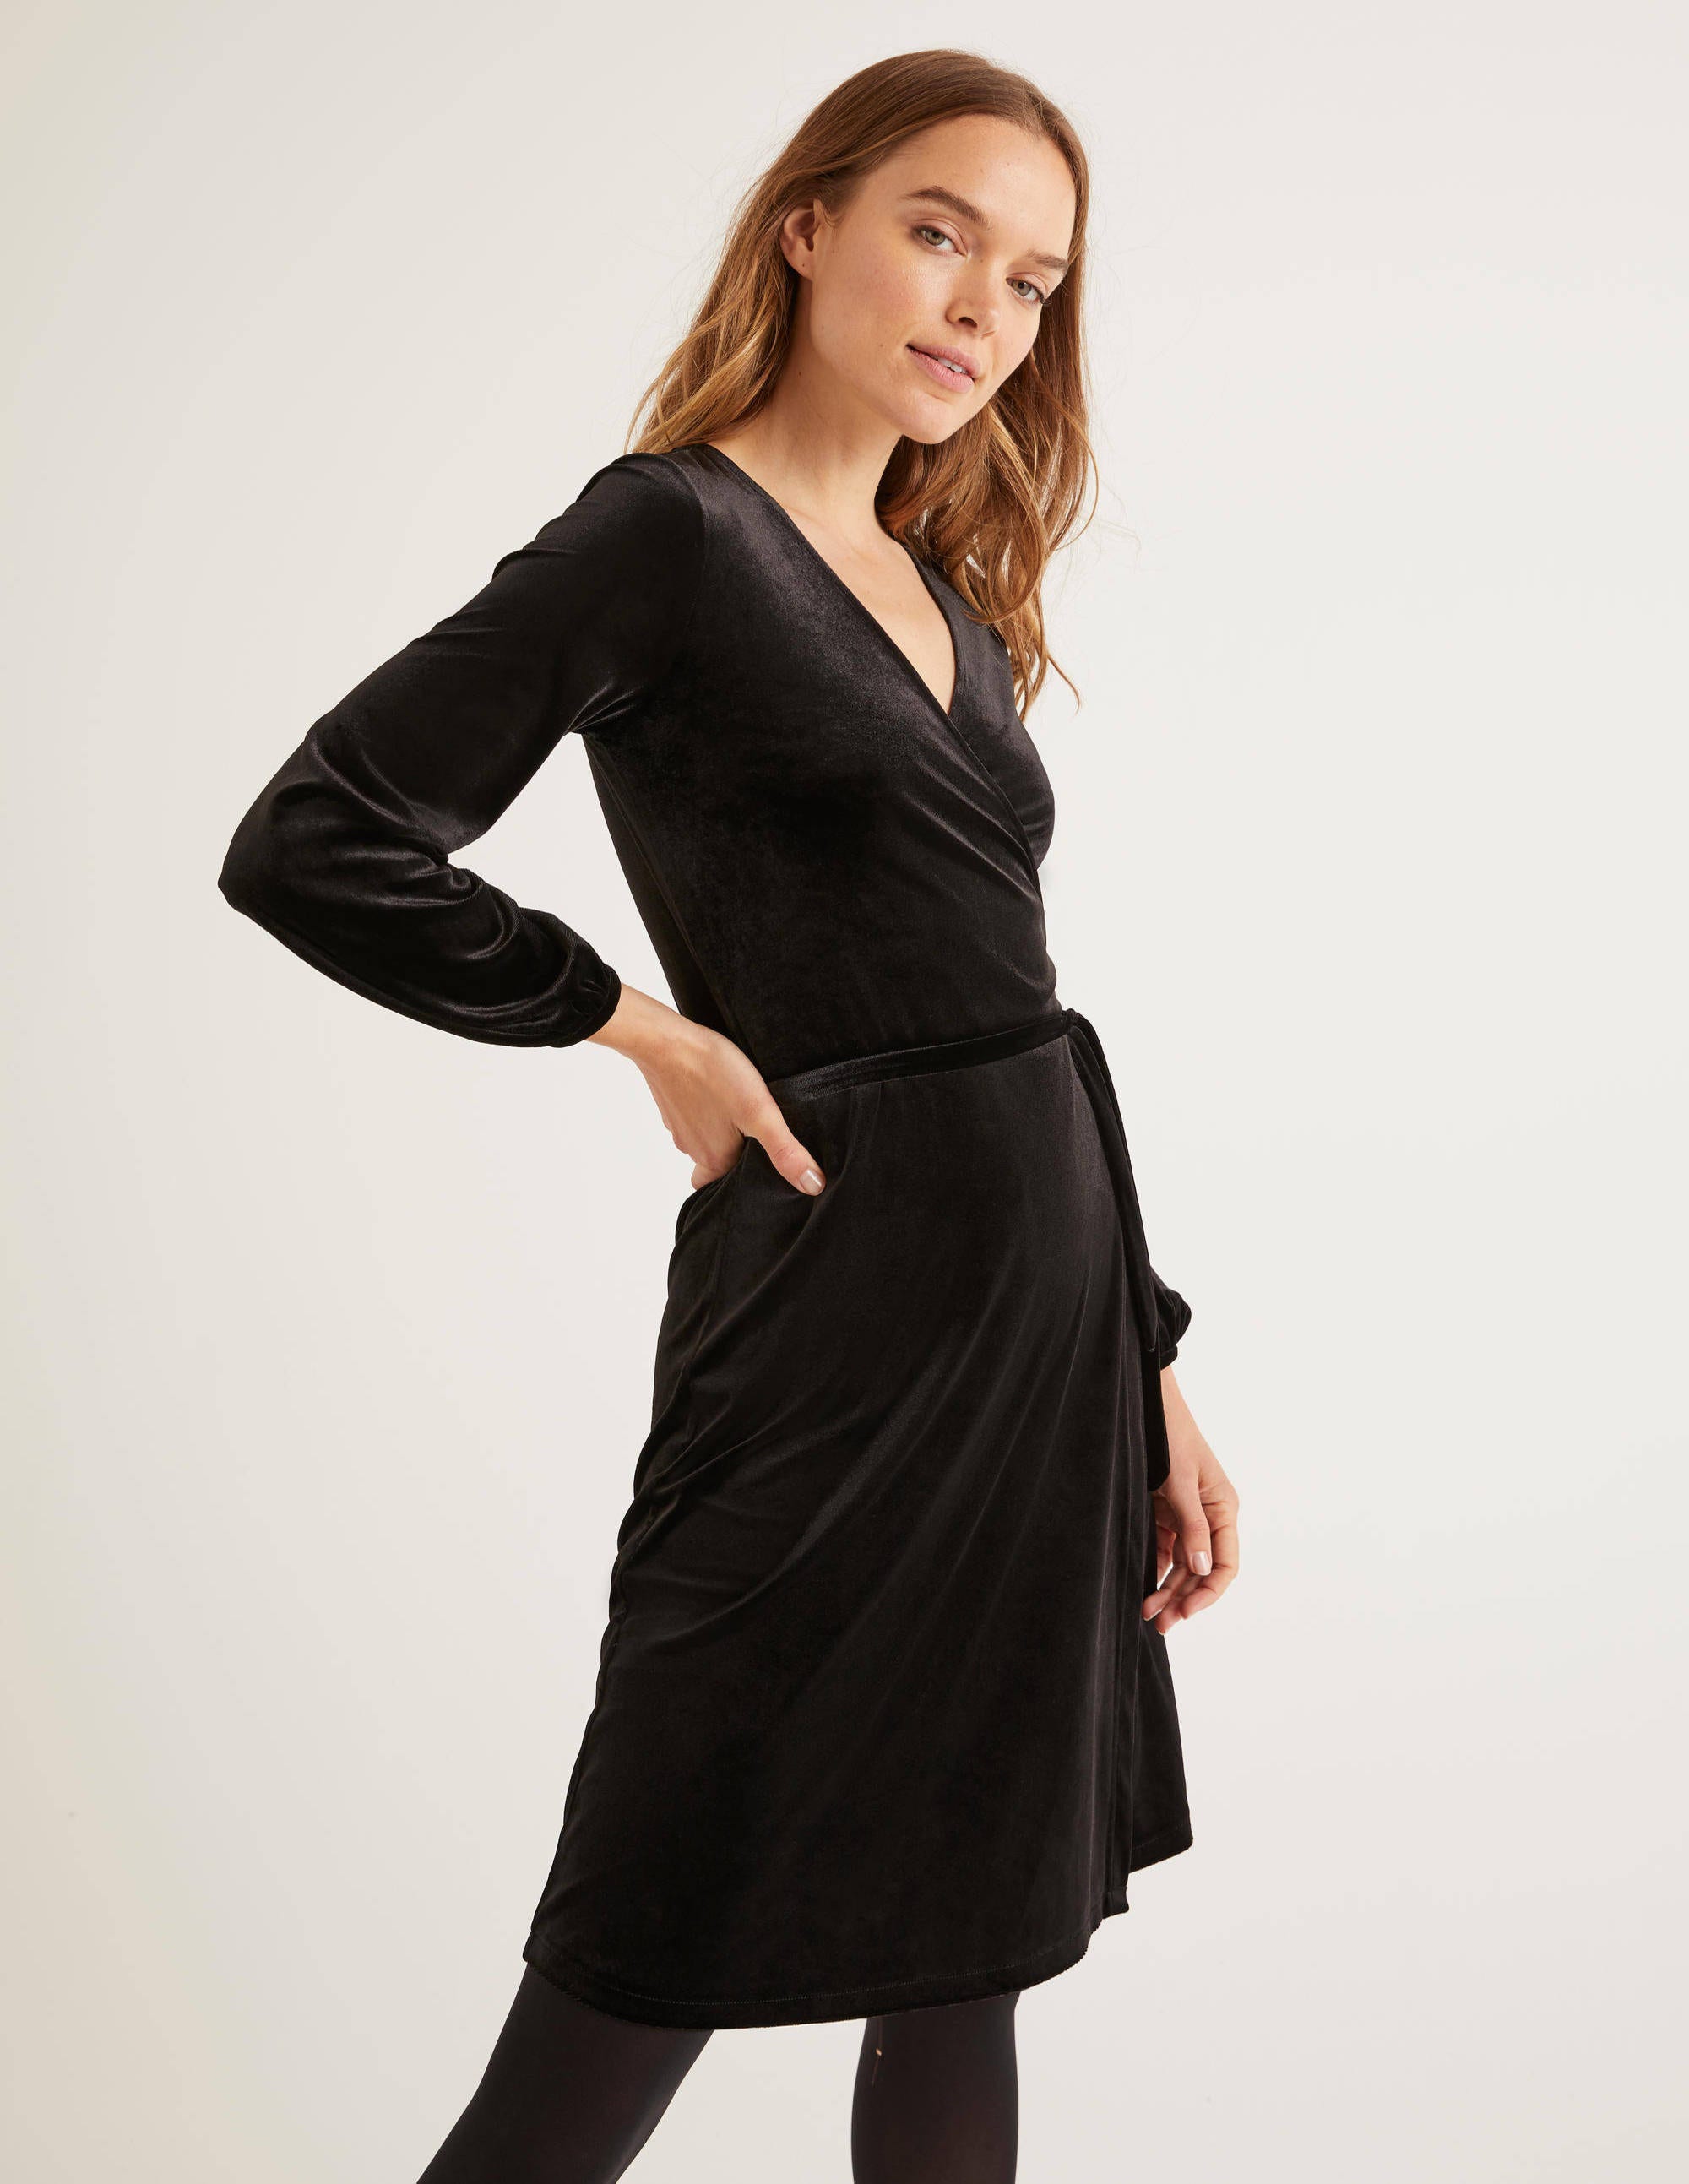 Black Wrap Dress With Sleeves Outlet ...